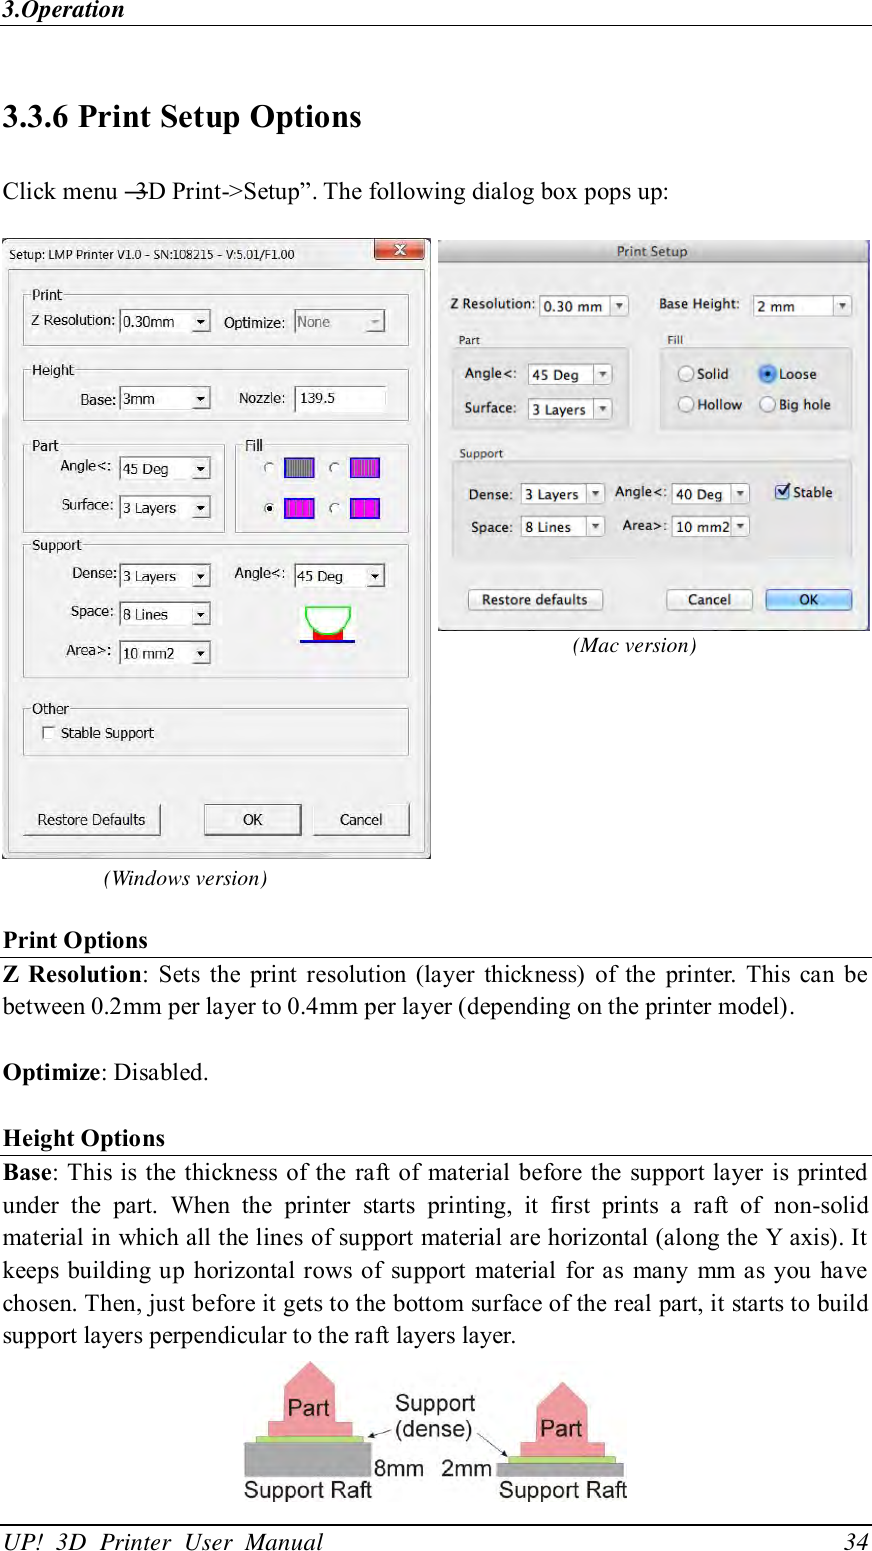 3.Operation UP!  3D  Printer  User  Manual                                34 3.3.6 Print Setup Options Click menu ―3D Print-&gt;Setup‖. The following dialog box pops up:      Print Options Z  Resolution: Sets  the  print resolution (layer  thickness)  of the  printer. This  can  be between 0.2mm per layer to 0.4mm per layer (depending on the printer model).    Optimize: Disabled.    Height Options Base: This is the thickness of the  raft of  material  before the support layer is  printed under  the  part.  When  the  printer  starts  printing,  it  first  prints  a  raft  of  non-solid material in which all the lines of support material are horizontal (along the Y axis). It keeps building up horizontal rows of  support material for as many  mm as you  have chosen. Then, just before it gets to the bottom surface of the real part, it starts to build support layers perpendicular to the raft layers layer.    (Mac version) (Windows version) 